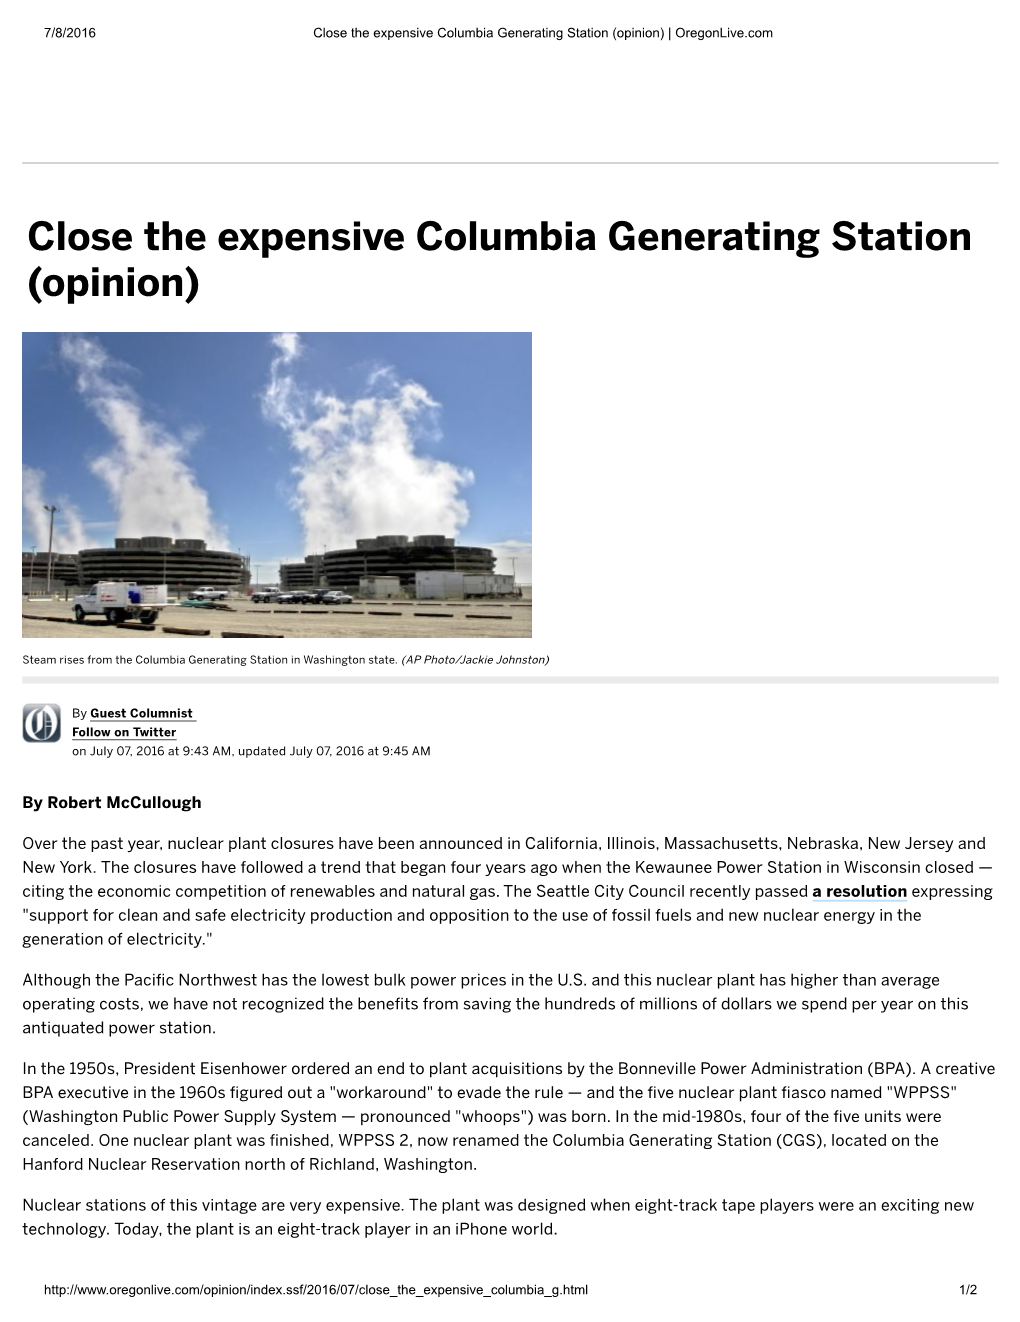 Close the Expensive Columbia Generating Station (Opinion) | Oregonlive.Com